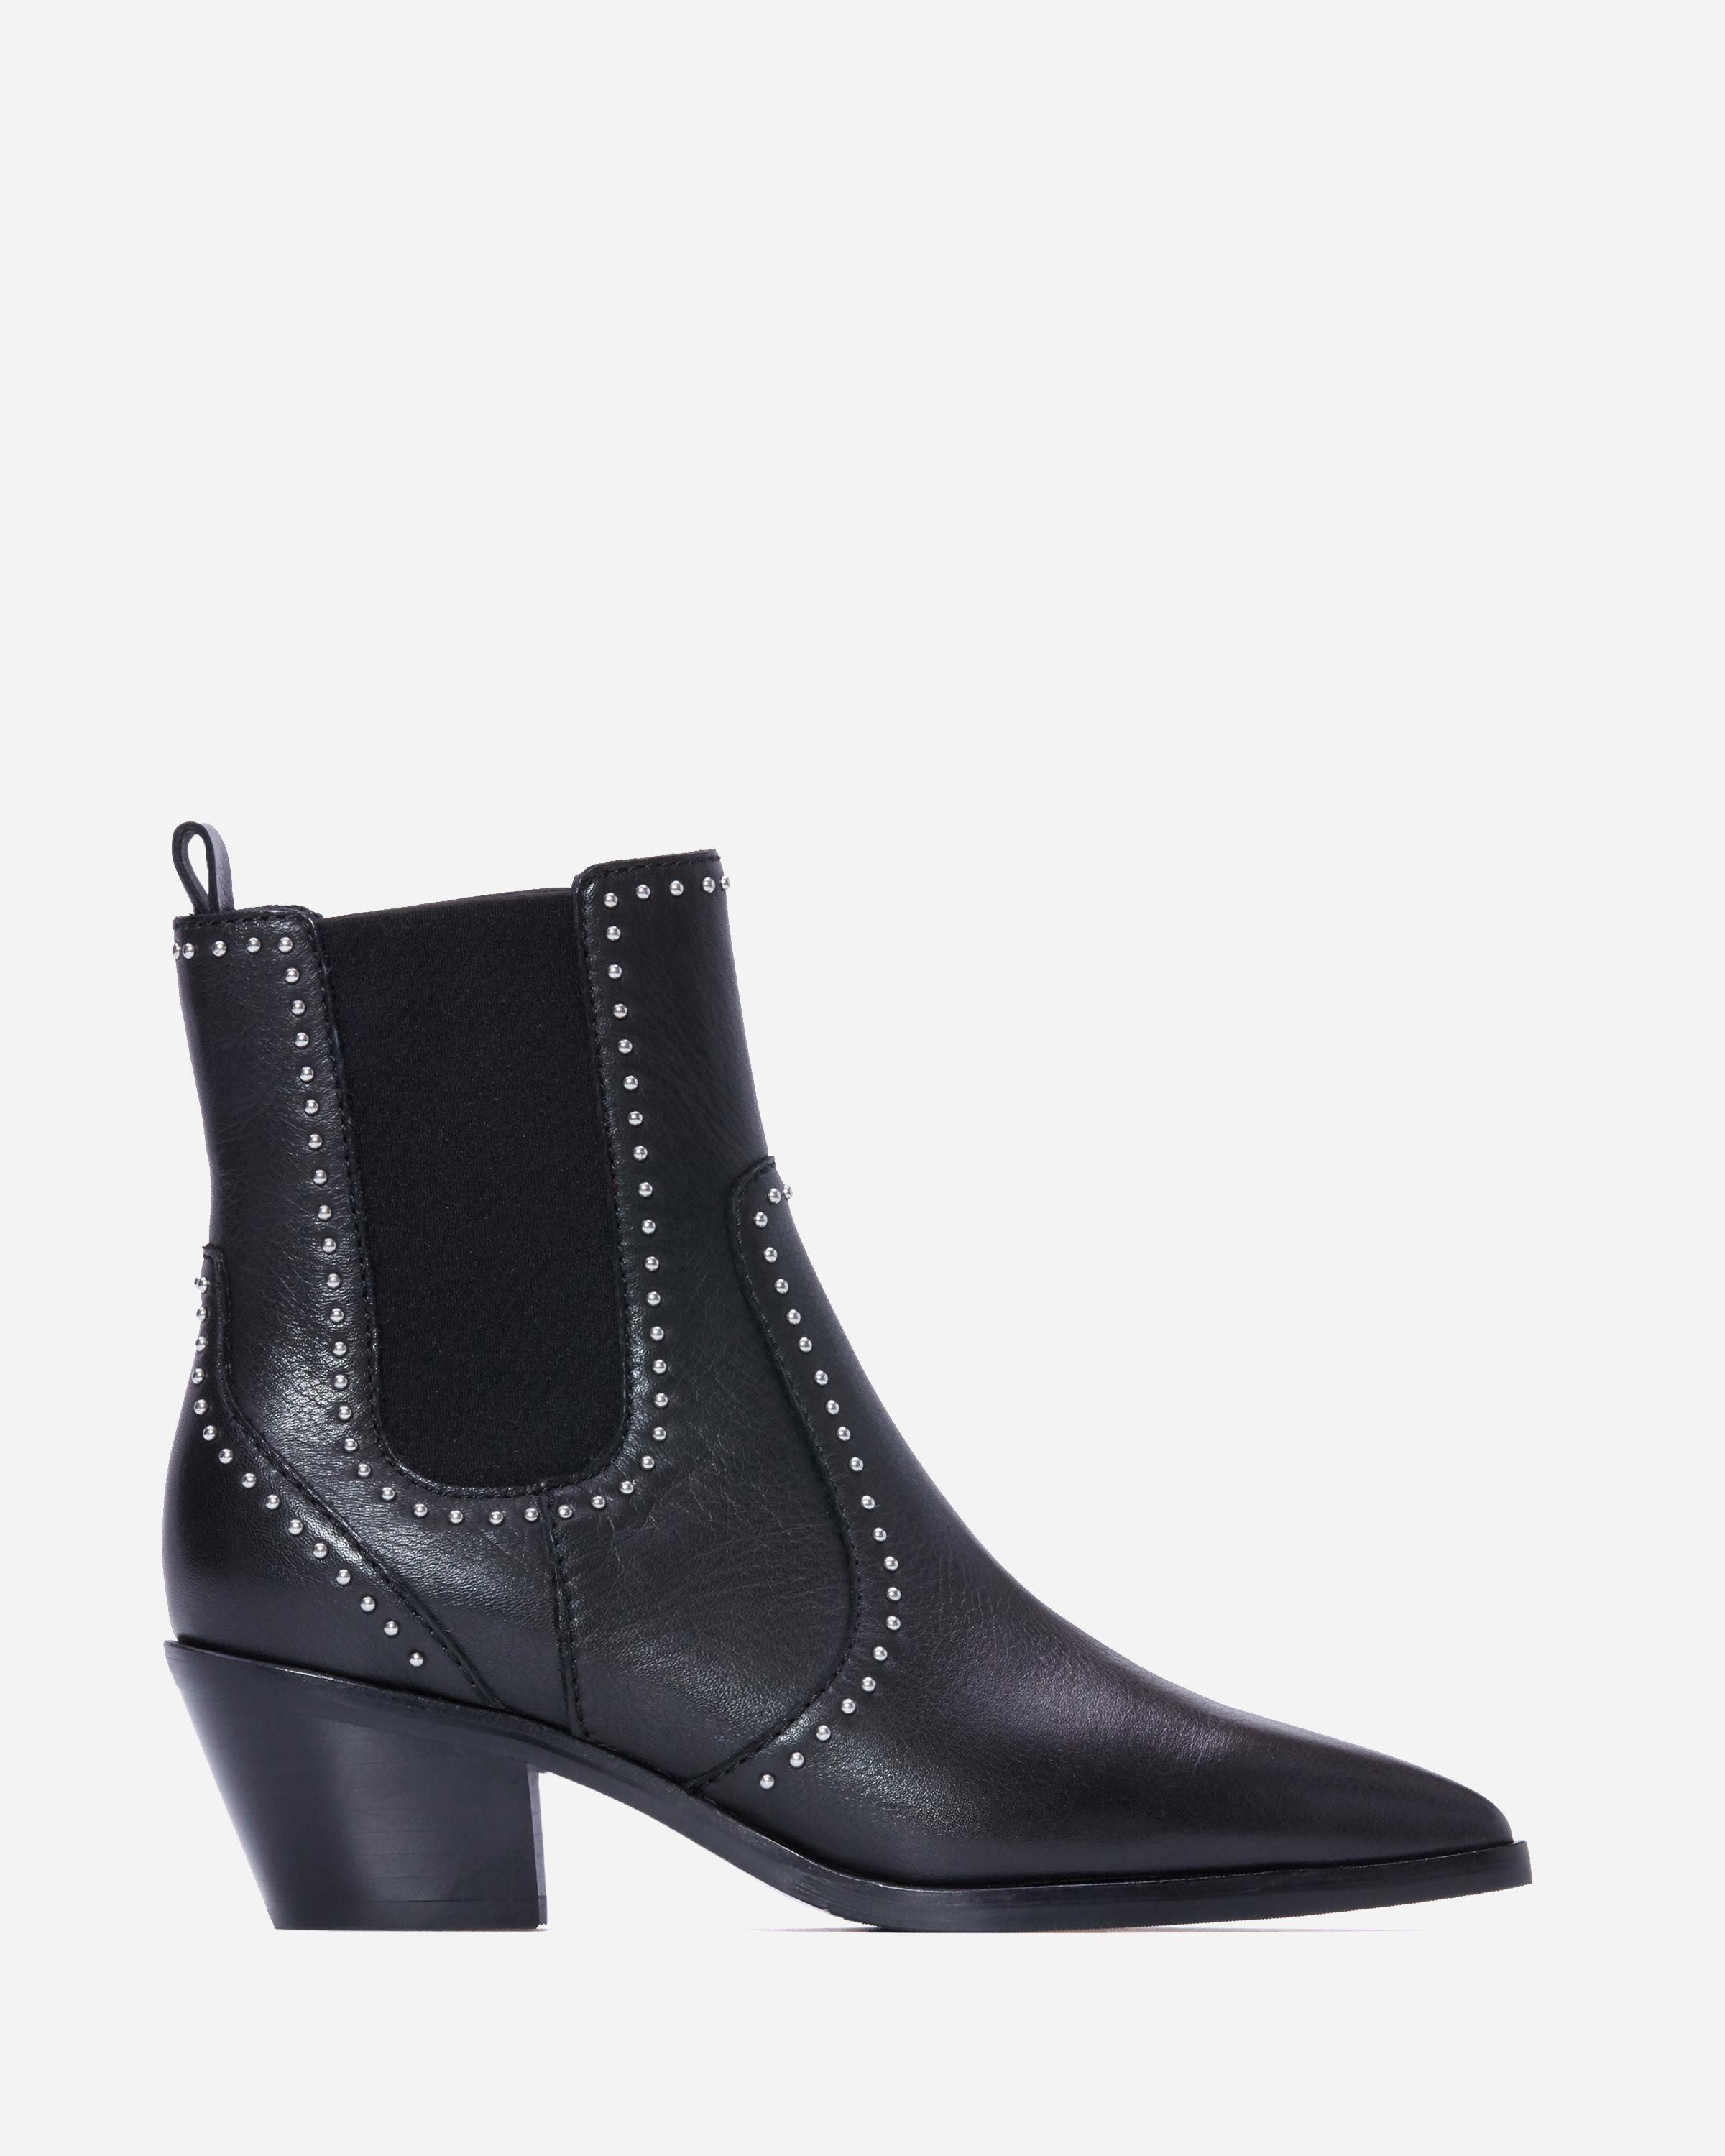 Willa Bootie - Black Leather Studded | Paige